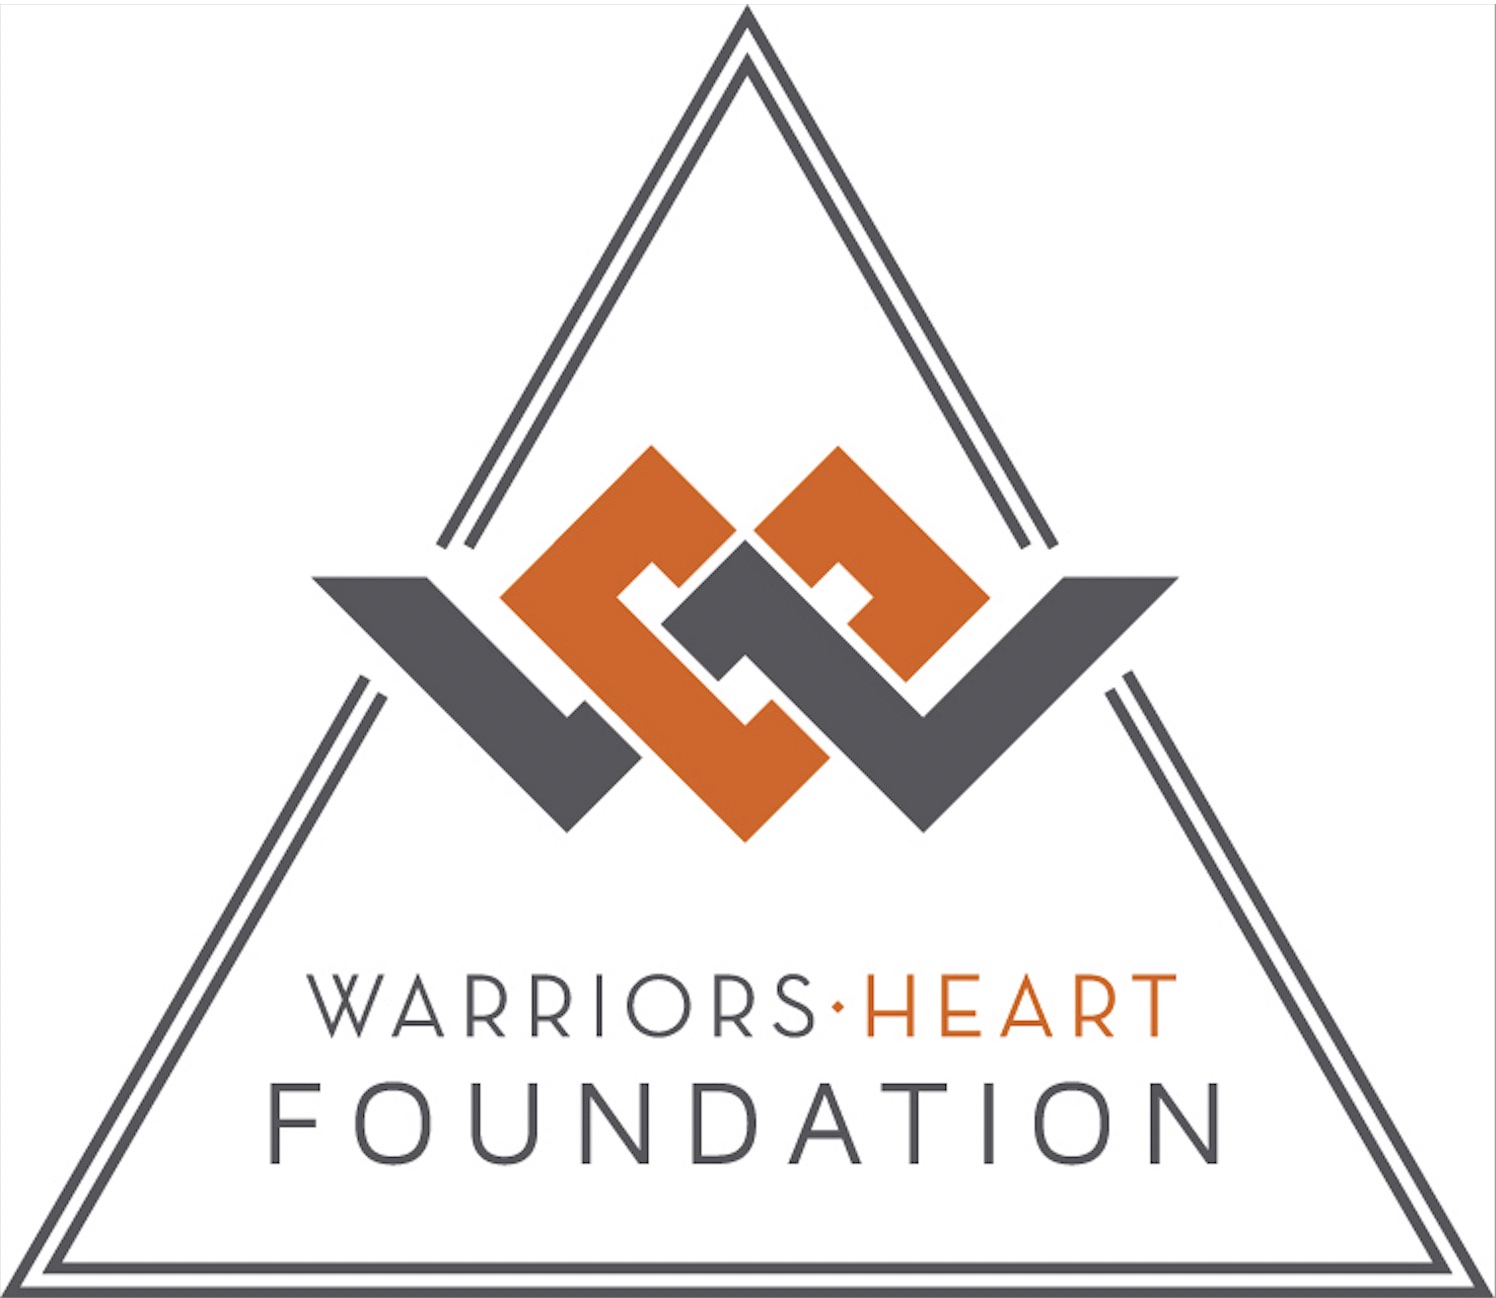 Warriors Heart Foundation is a 501 (c)(3) that accepts donations to help heal military, veterans and first responders with their peers.